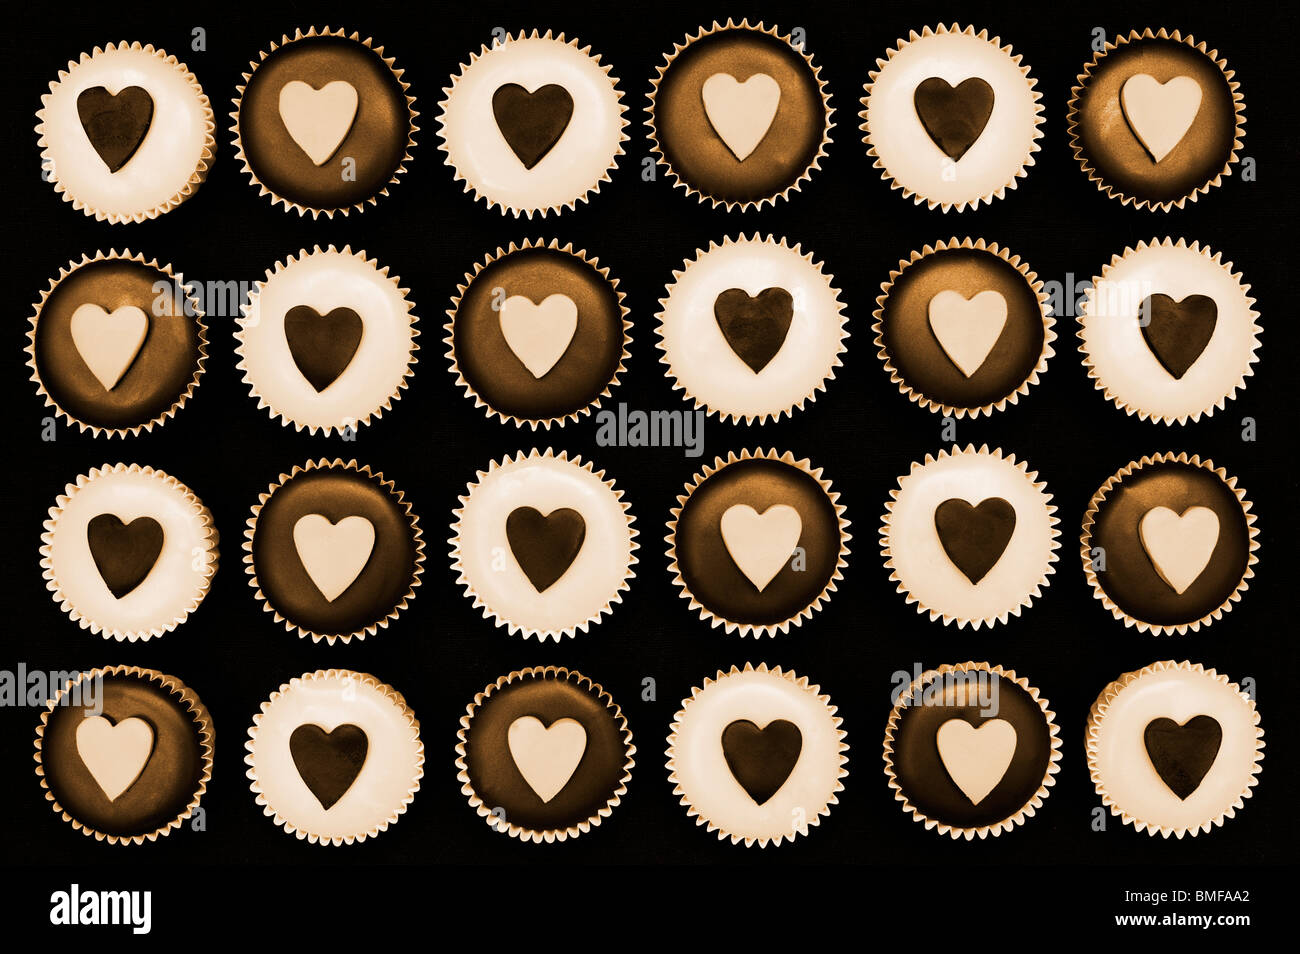 Mini cupcakes decorated with heart shapes. Sepia tone Stock Photo